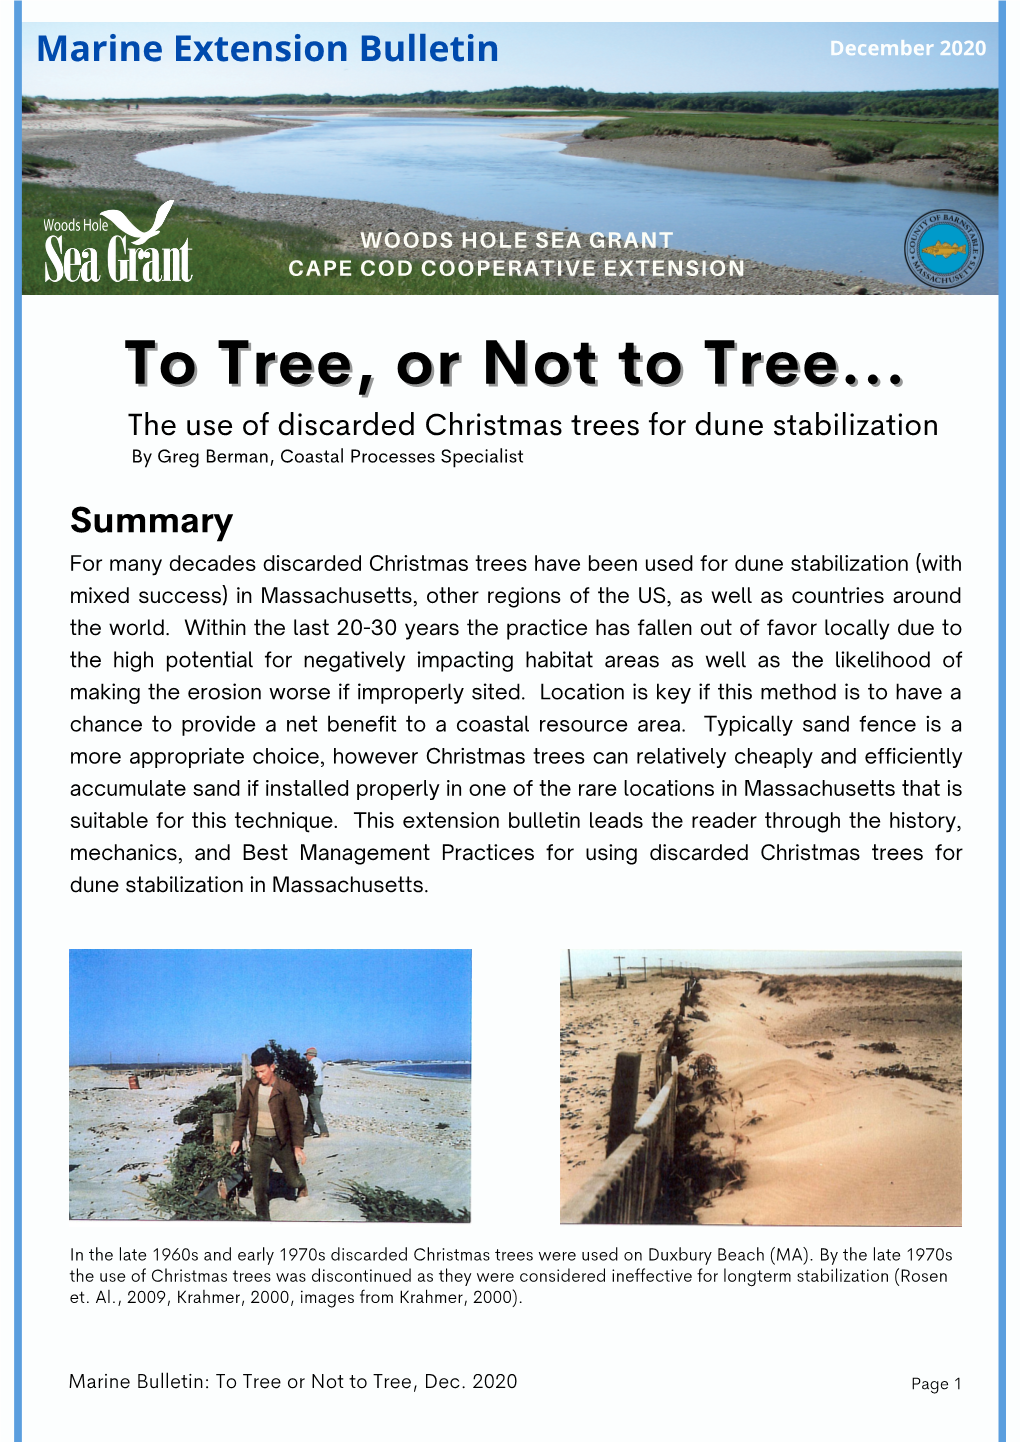 The Use of Discarded Christmas Trees for Dune Stabilization In